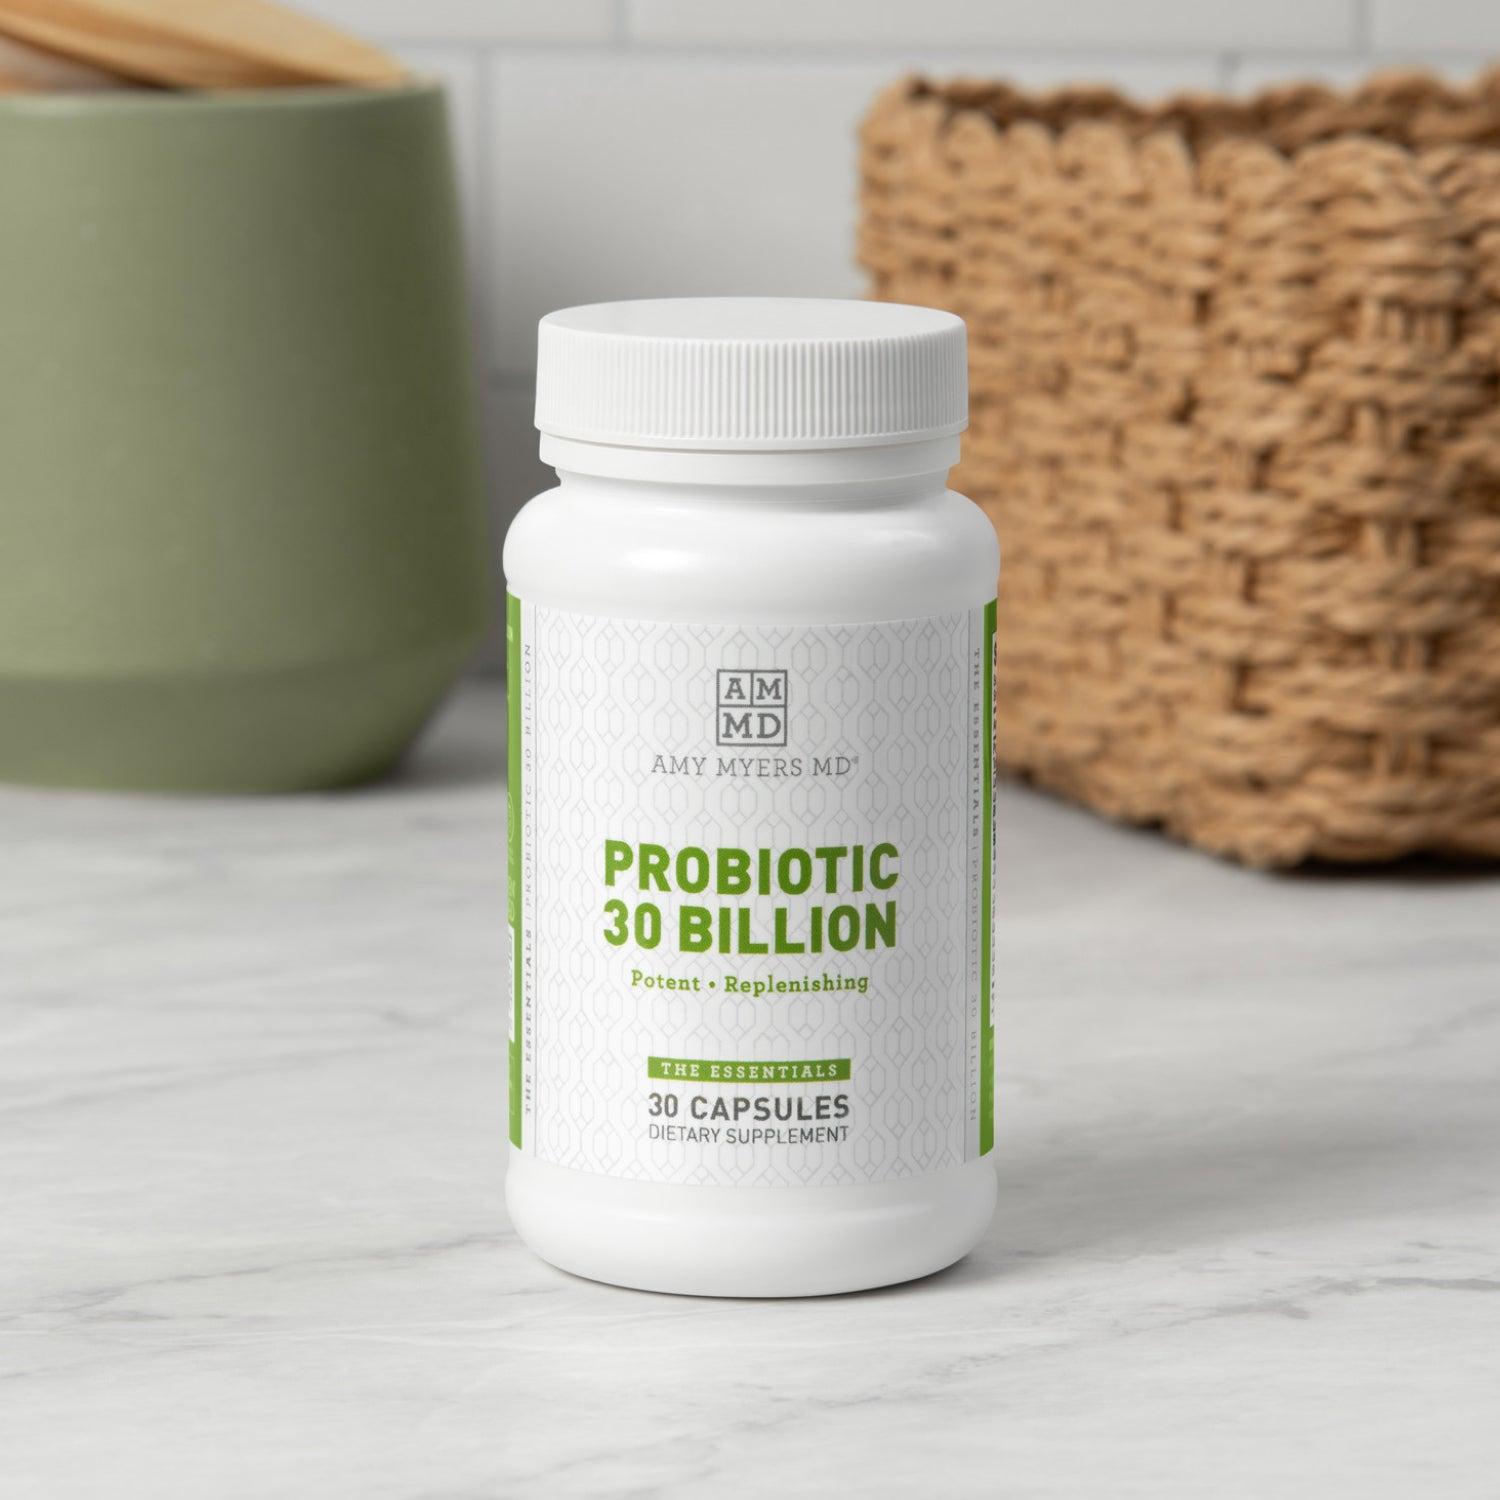 A bottle of Probiotic 30 billion with capsules on a countertop - Front Image - Amy Myers MD®